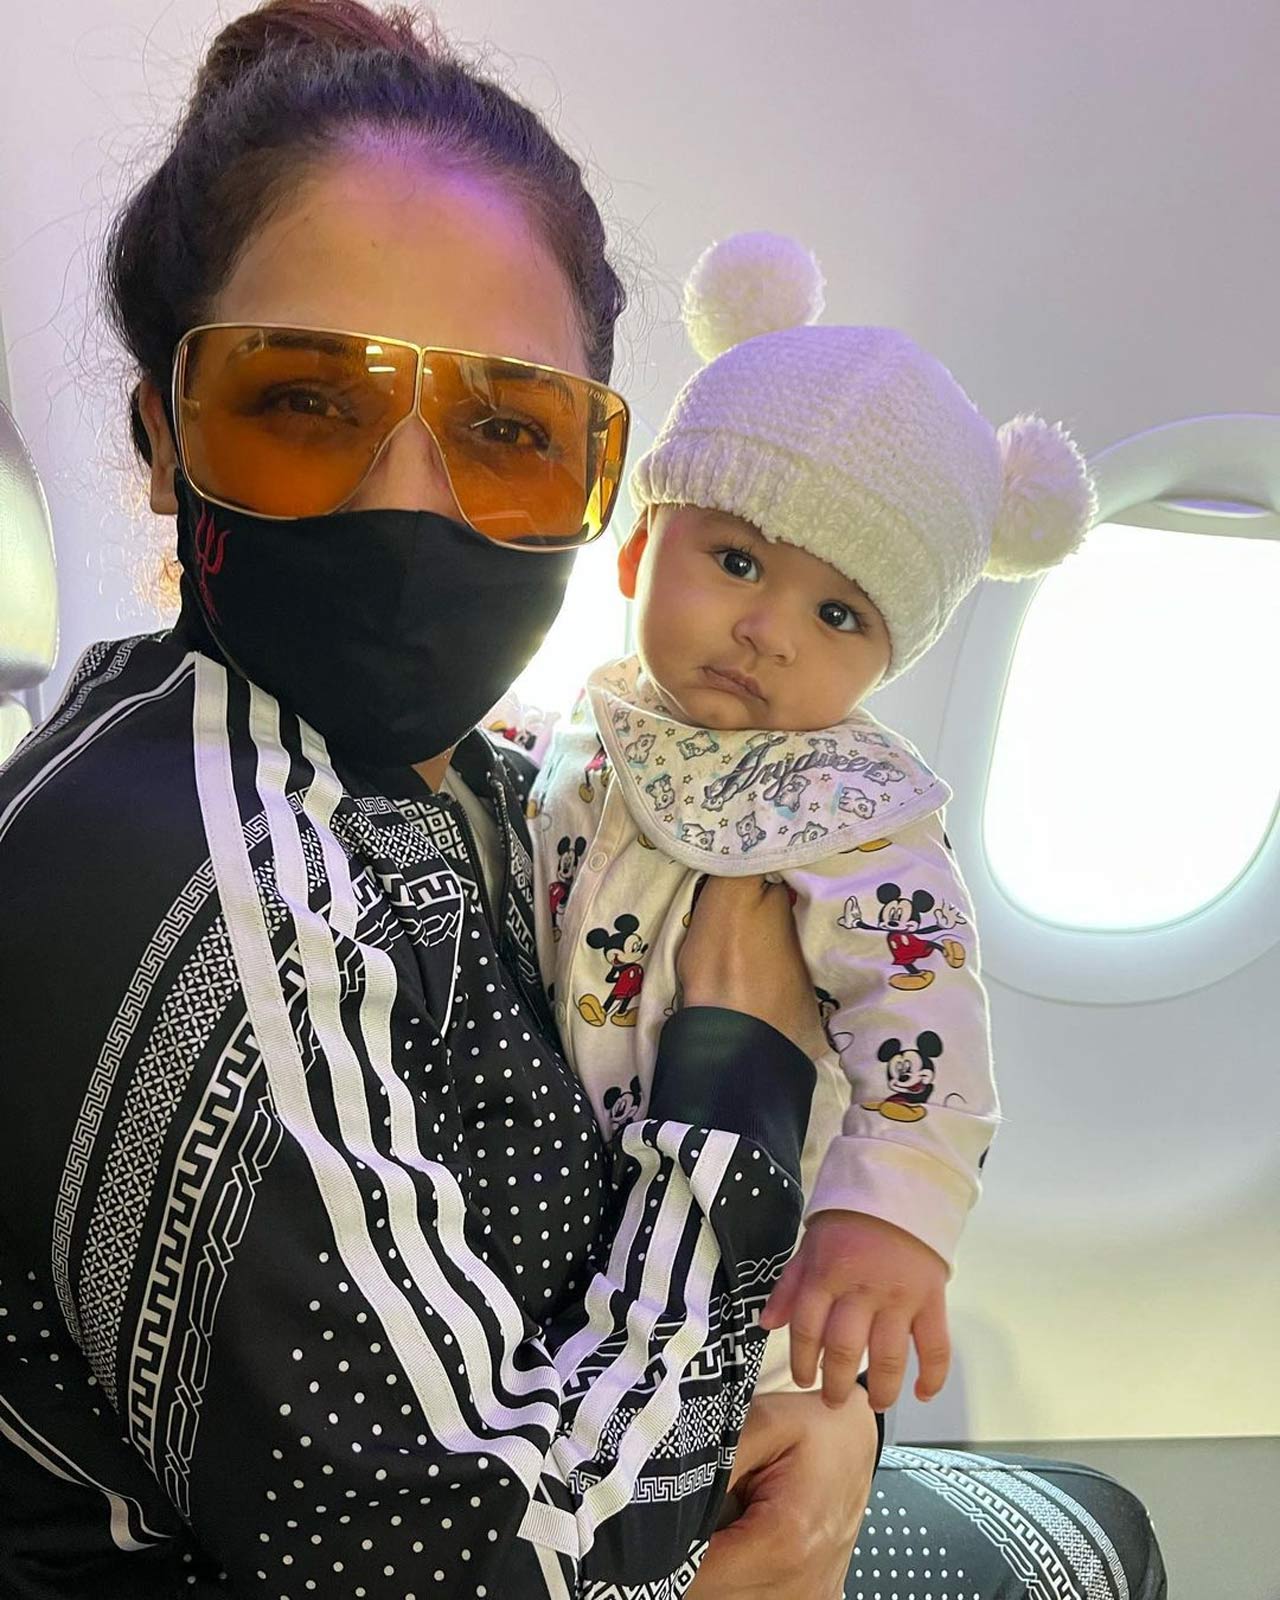 Neeti Mohan keeps sharing adorable baby pictures on social media, giving her followers a glimpse of the beautiful memories created with their newborn. Even if she is travelling for work, Neeti takes along her tiny tot wherever she goes. This picture too was taken on a flight where the singer was headed to perform at an event in Bengaluru.